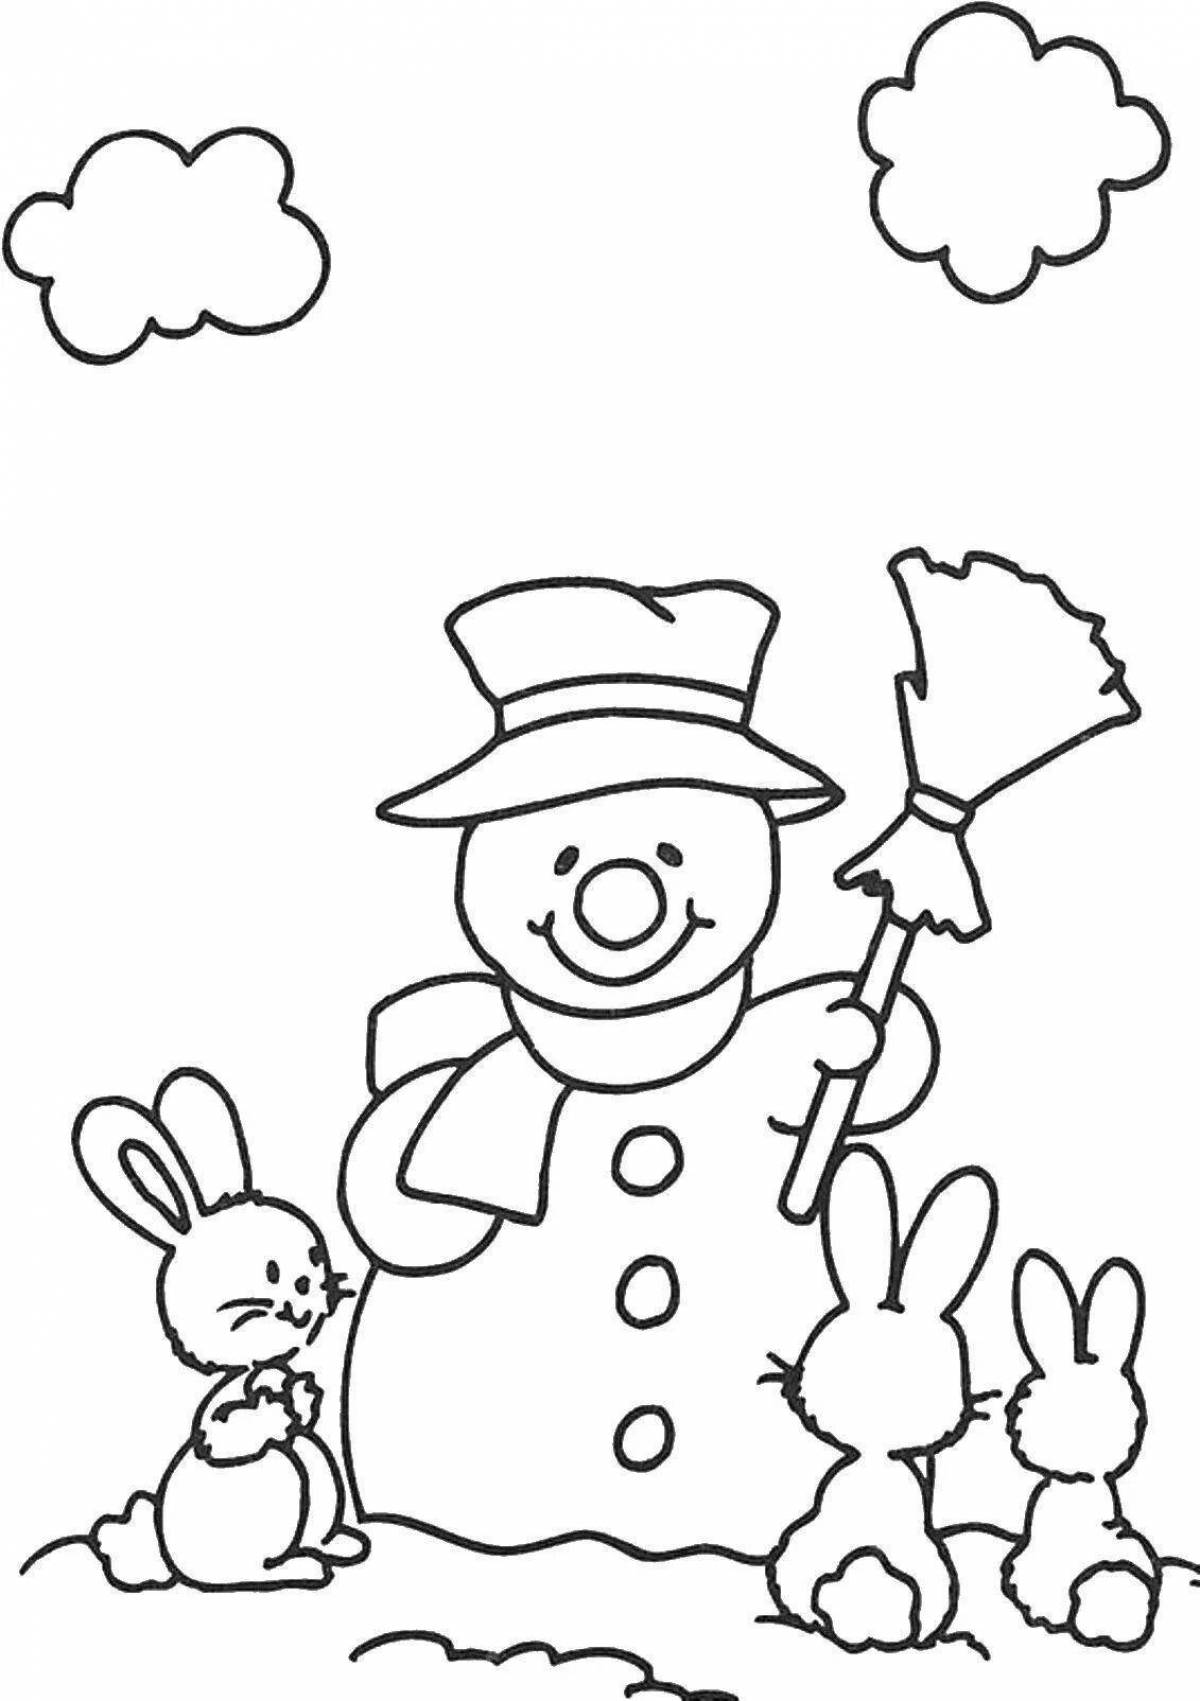 Bunny and snowman #3